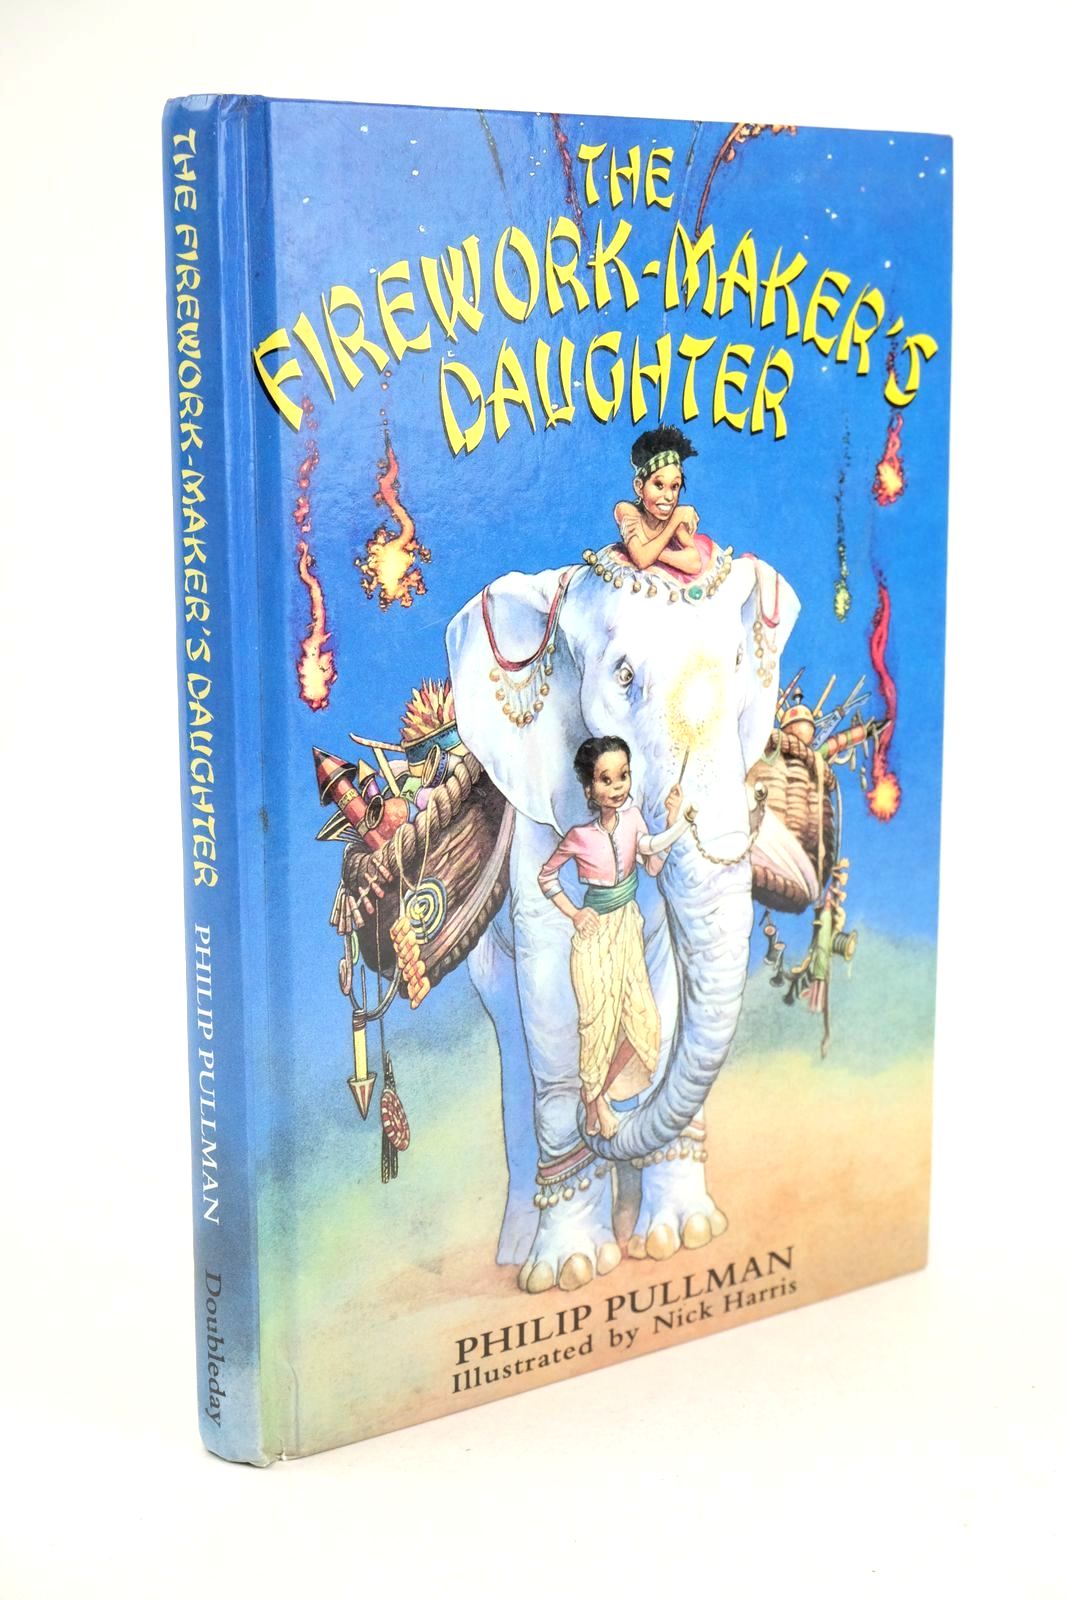 Photo of THE FIREWORK-MAKER'S DAUGHTER written by Pullman, Philip illustrated by Harris, Nick published by Doubleday (STOCK CODE: 1325794)  for sale by Stella & Rose's Books